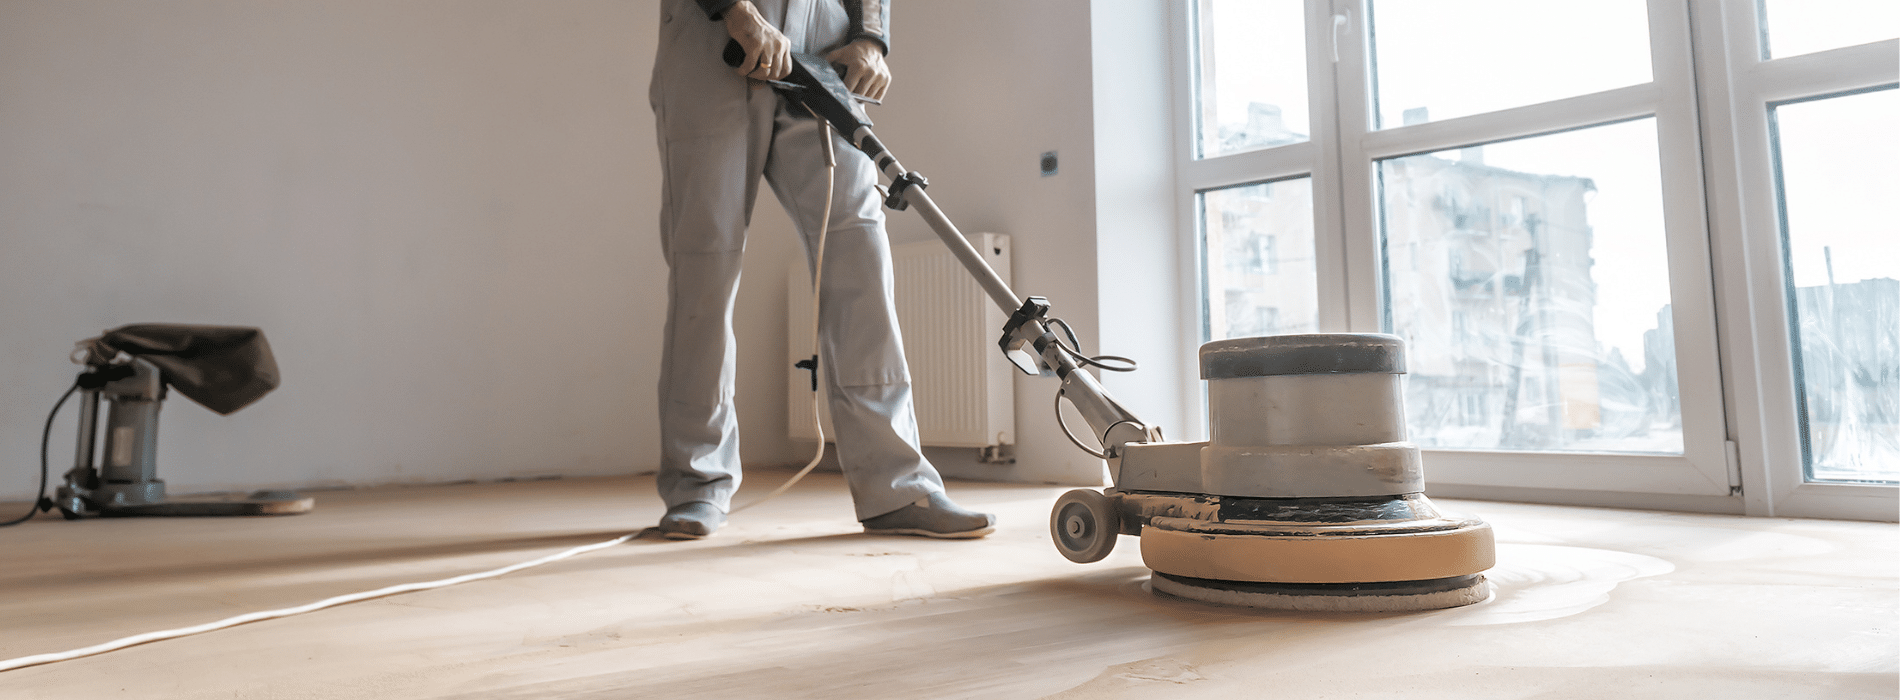 In Chatham, ME4 Mr Sander® employing the Bona FlexiSand 1.9, a powerful and versatile buffer sander (1.9kW, 230V) ideal for parquet floor sanding, oiling, and grinding. 